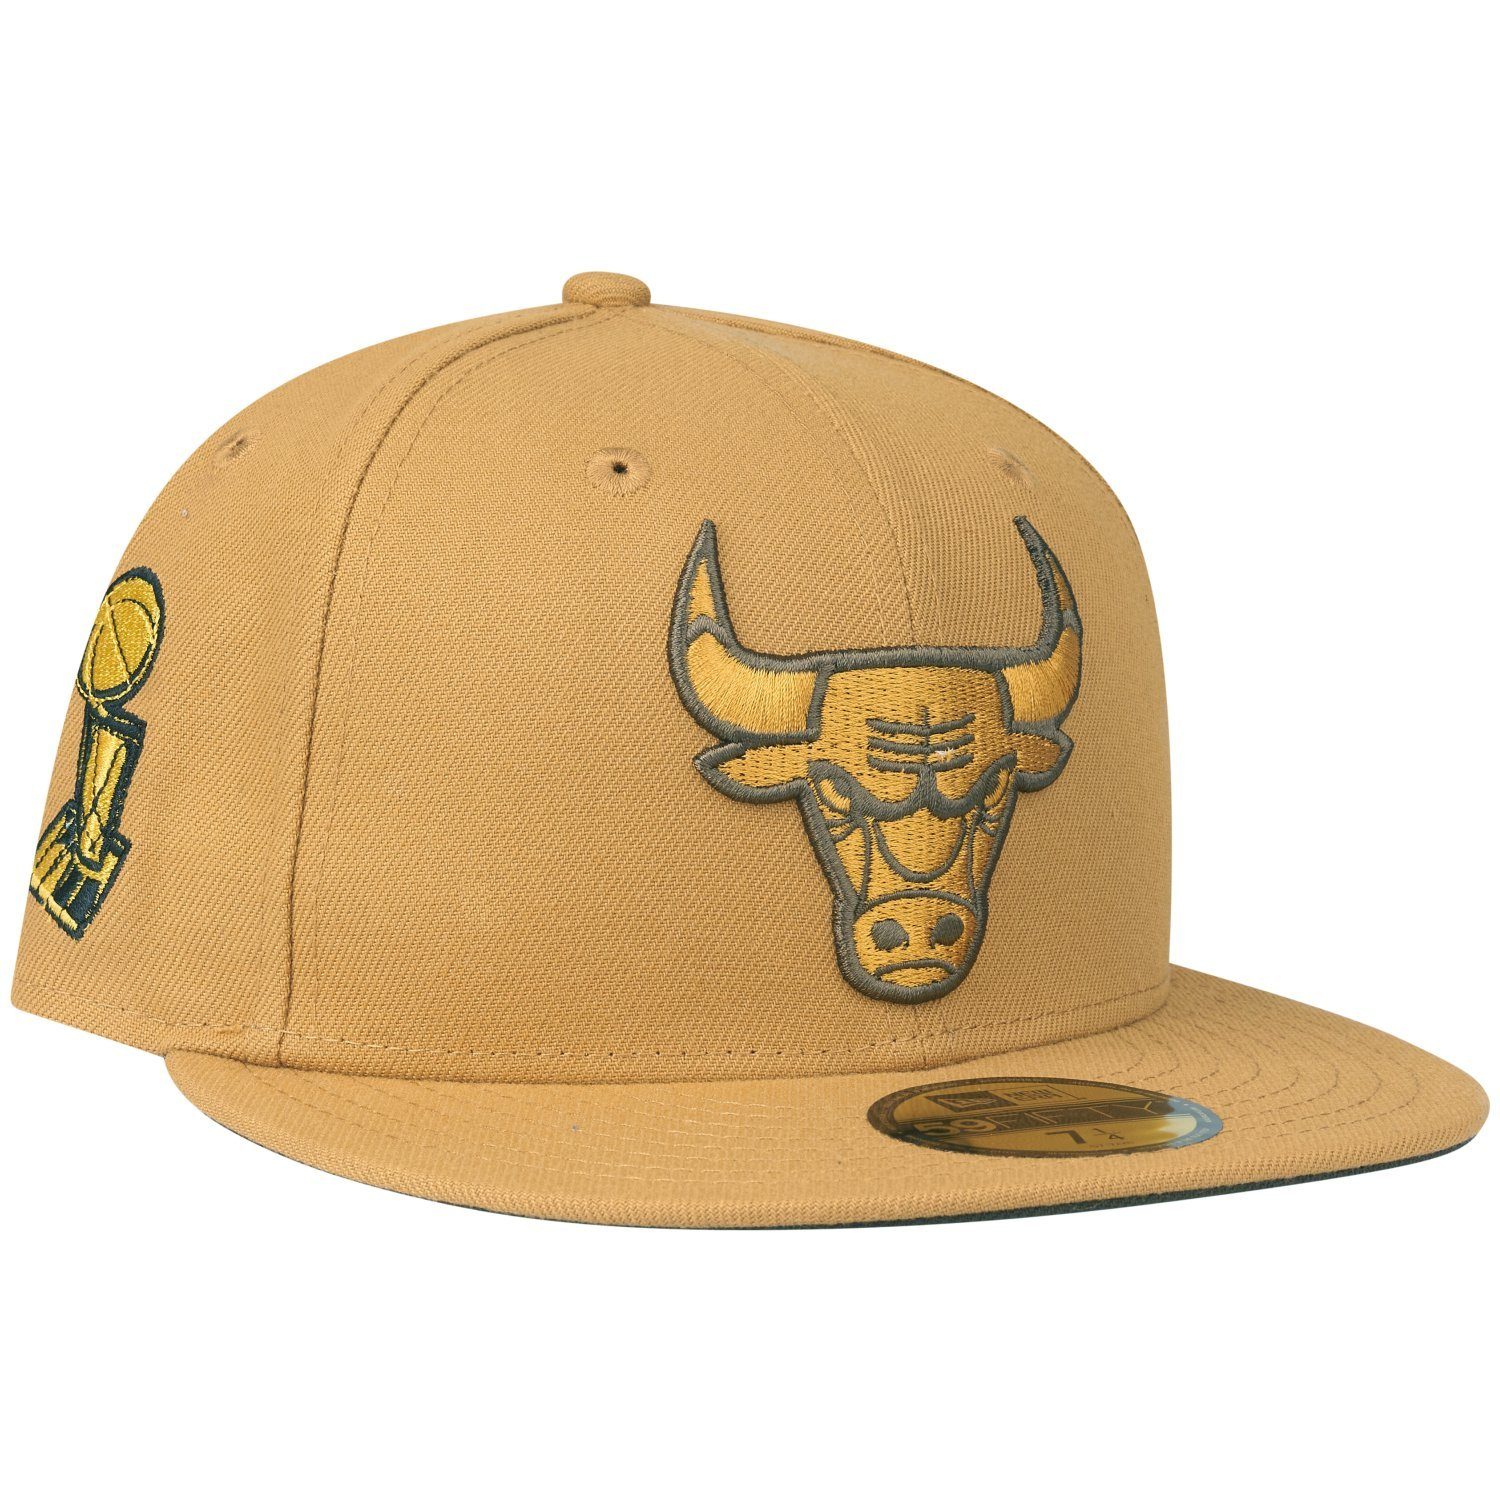 New Era Fitted Cap 59Fifty CHAMPS Chicago Bulls panama | Fitted Caps